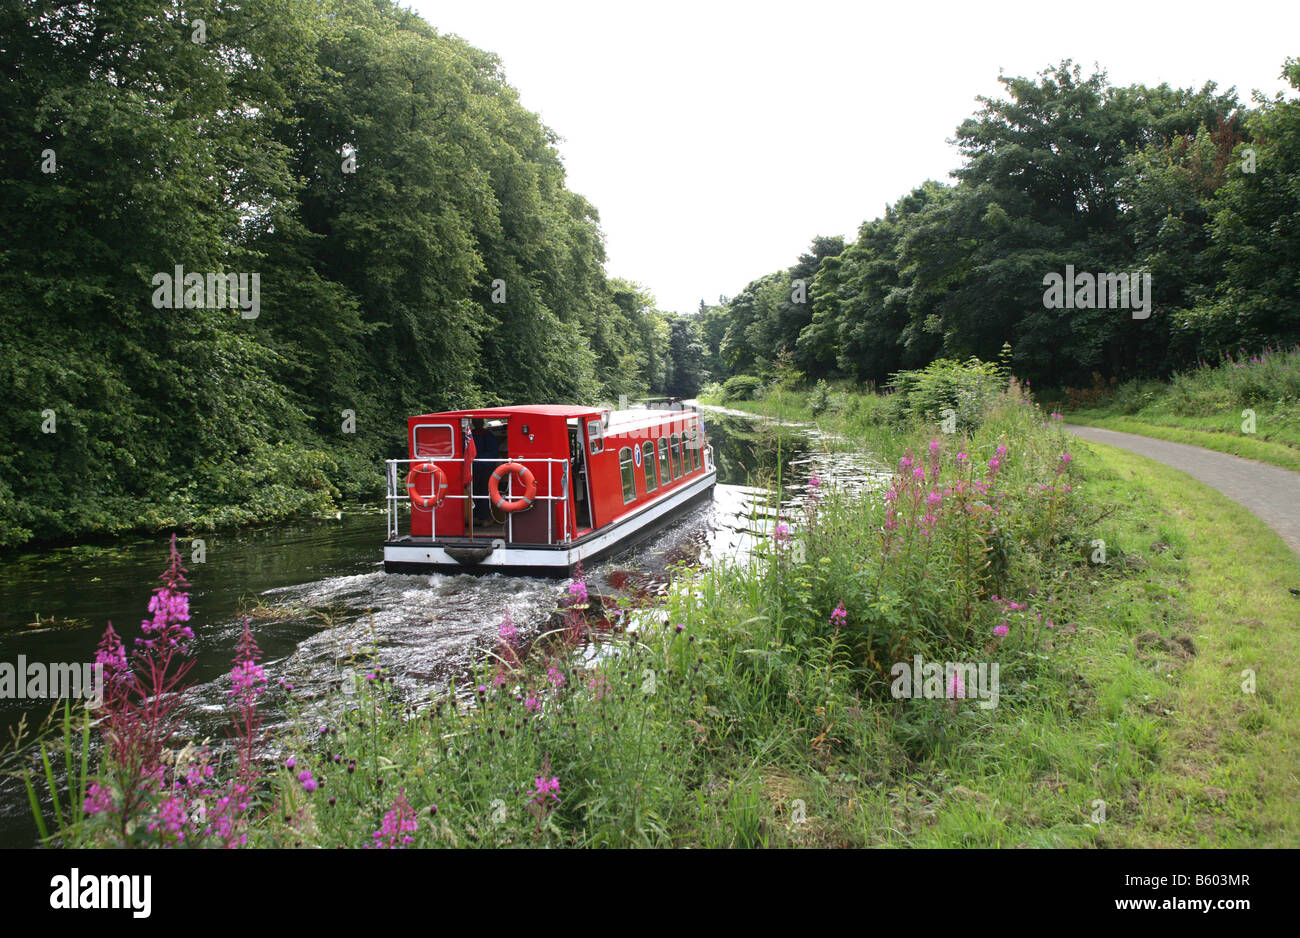 SEAGULL TRUST CANAL BOAT ON THE FORTH & CLYDE CANAL AT CADDER,NEAR GLASGOW, SCOTLAND; UK; Stock Photo